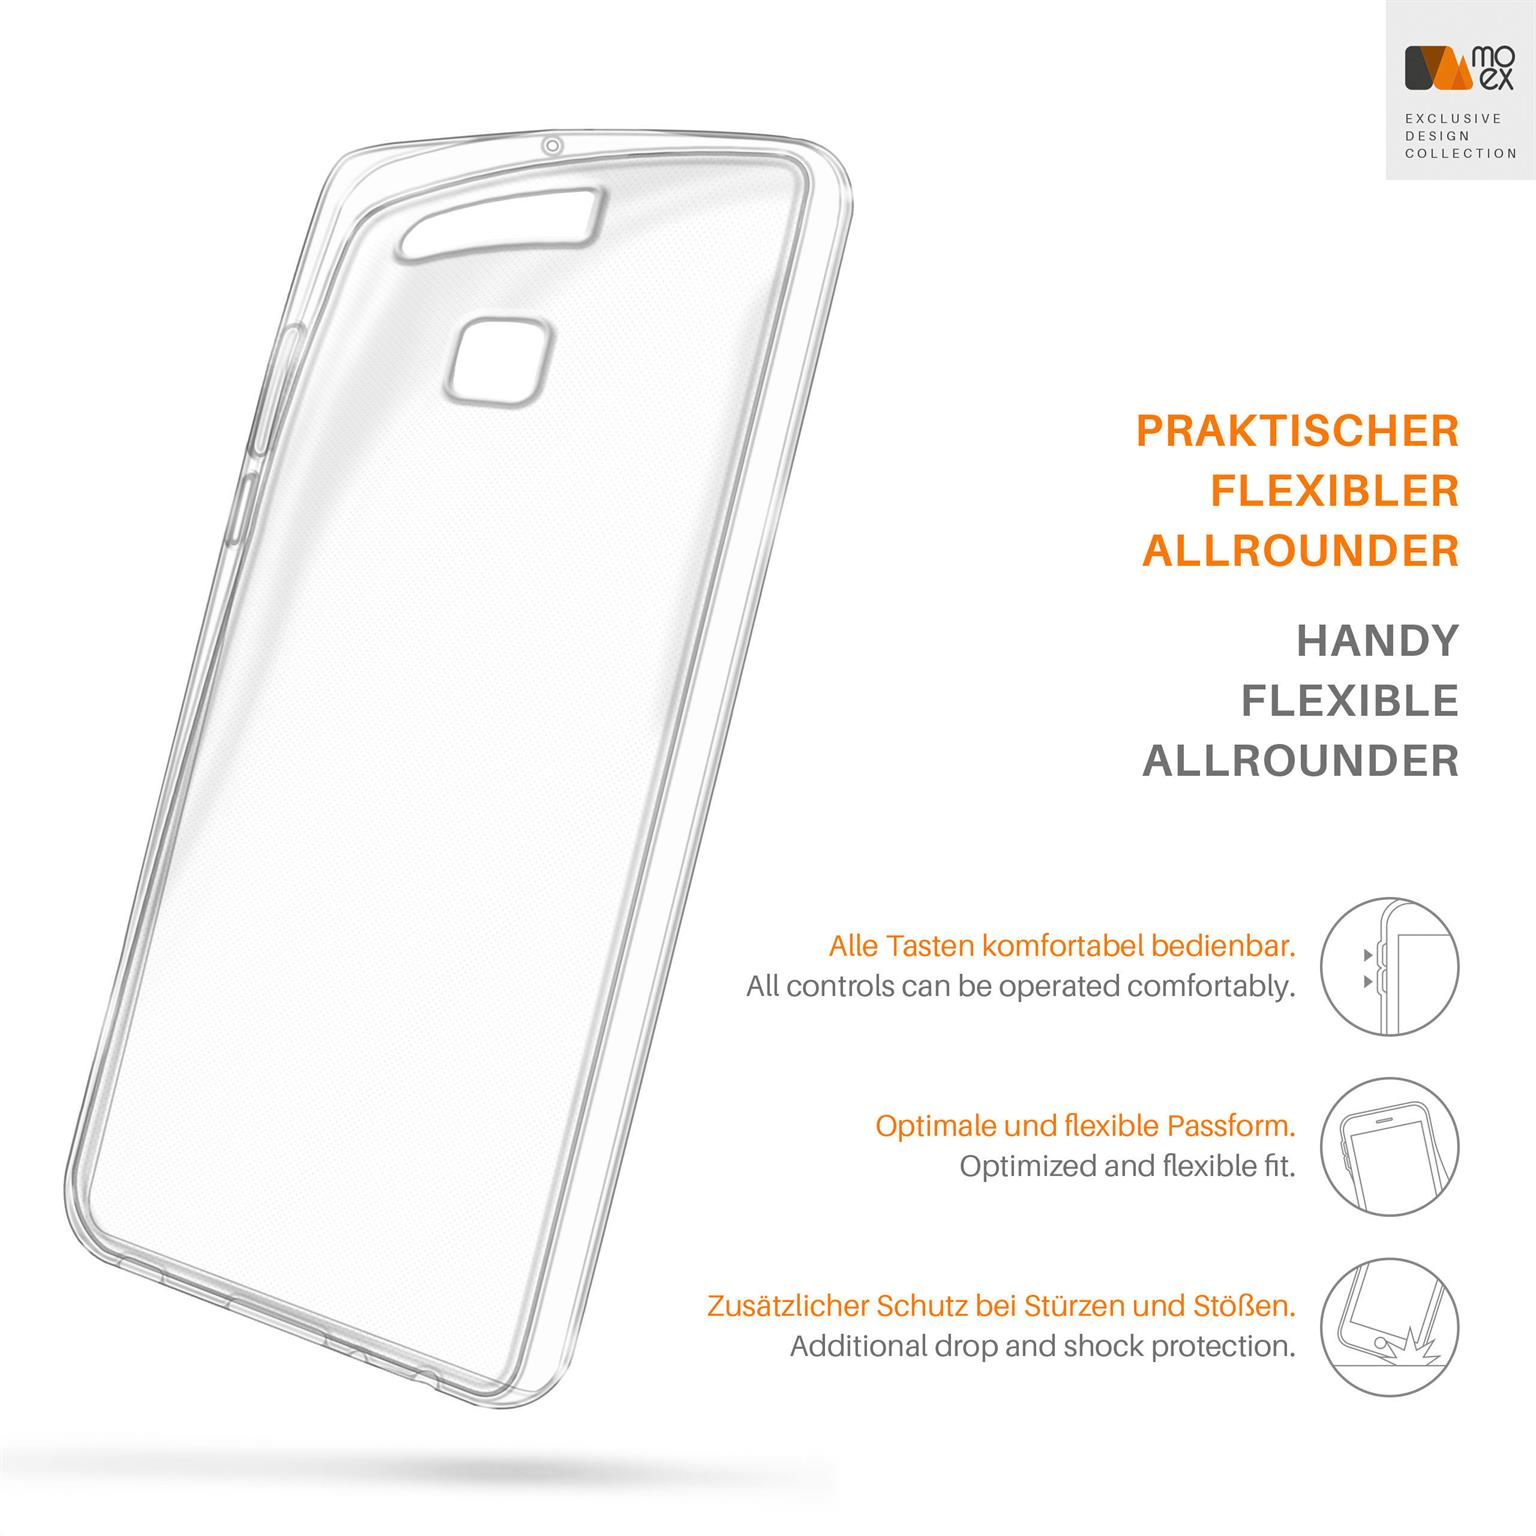 MOEX Aero Huawei, Backcover, Case, Crystal-Clear P9